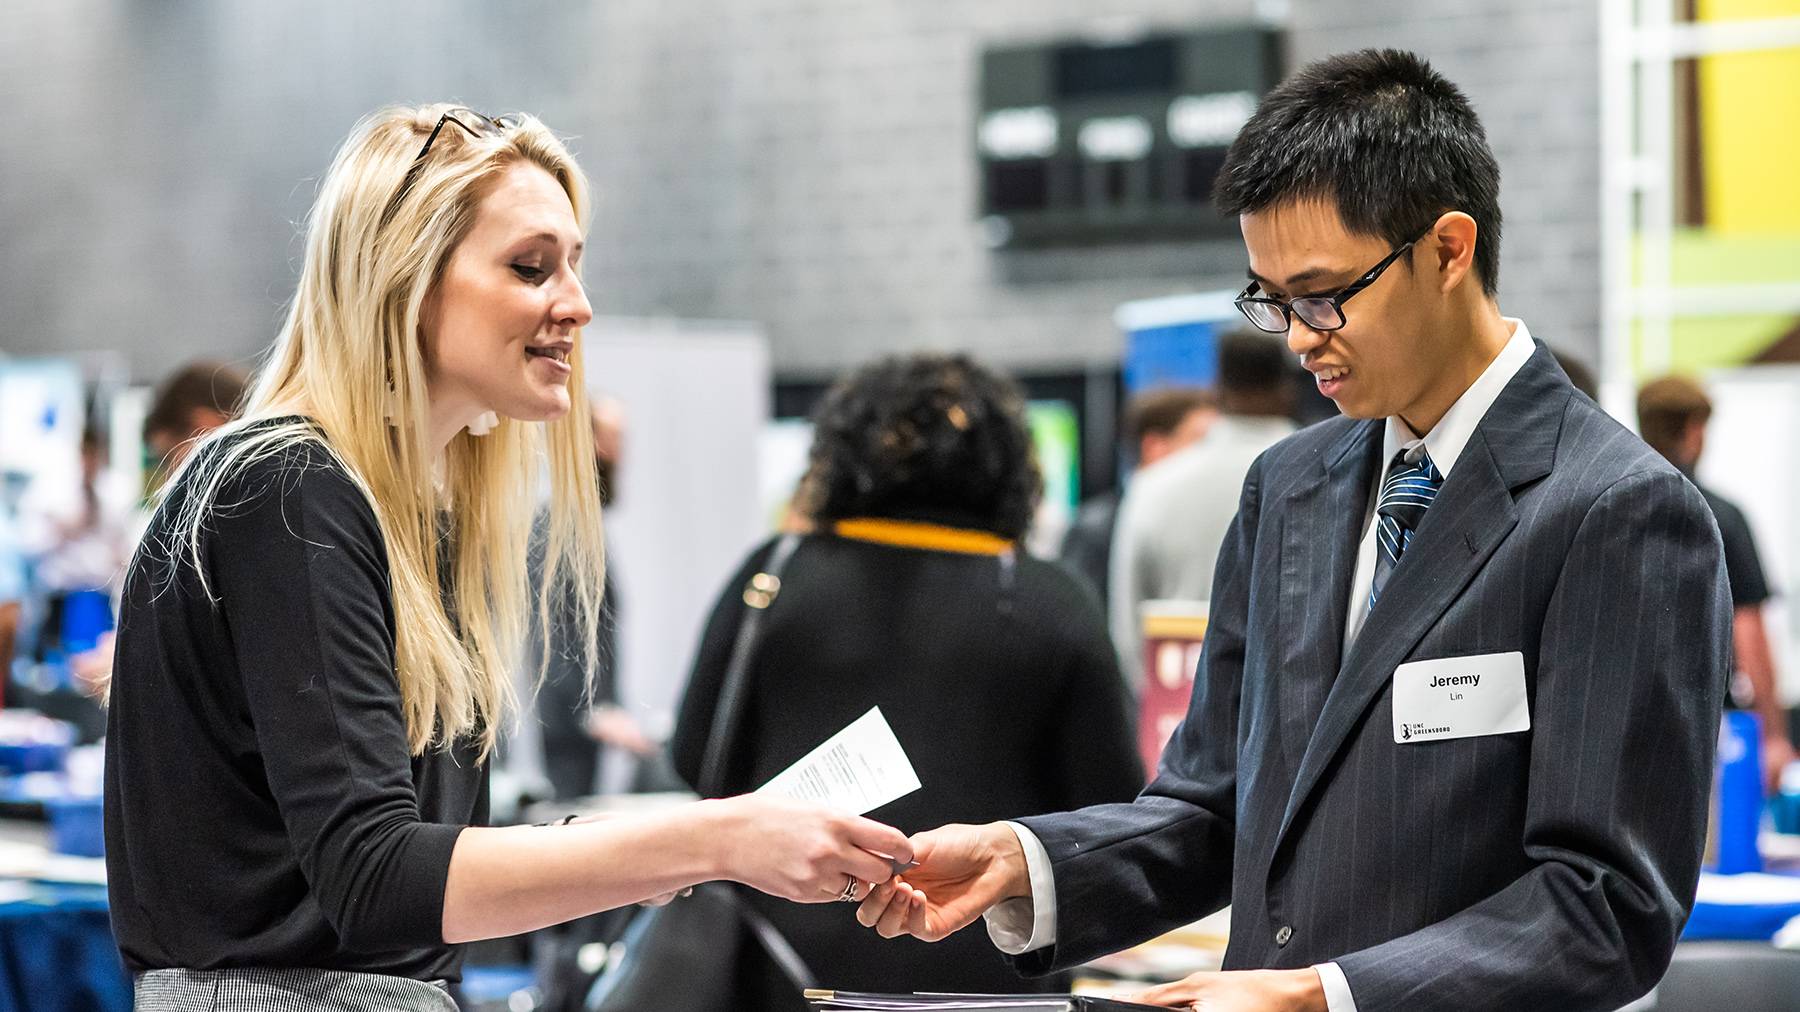 A student receives a business card from a hiring representative at an on-campus career fair.